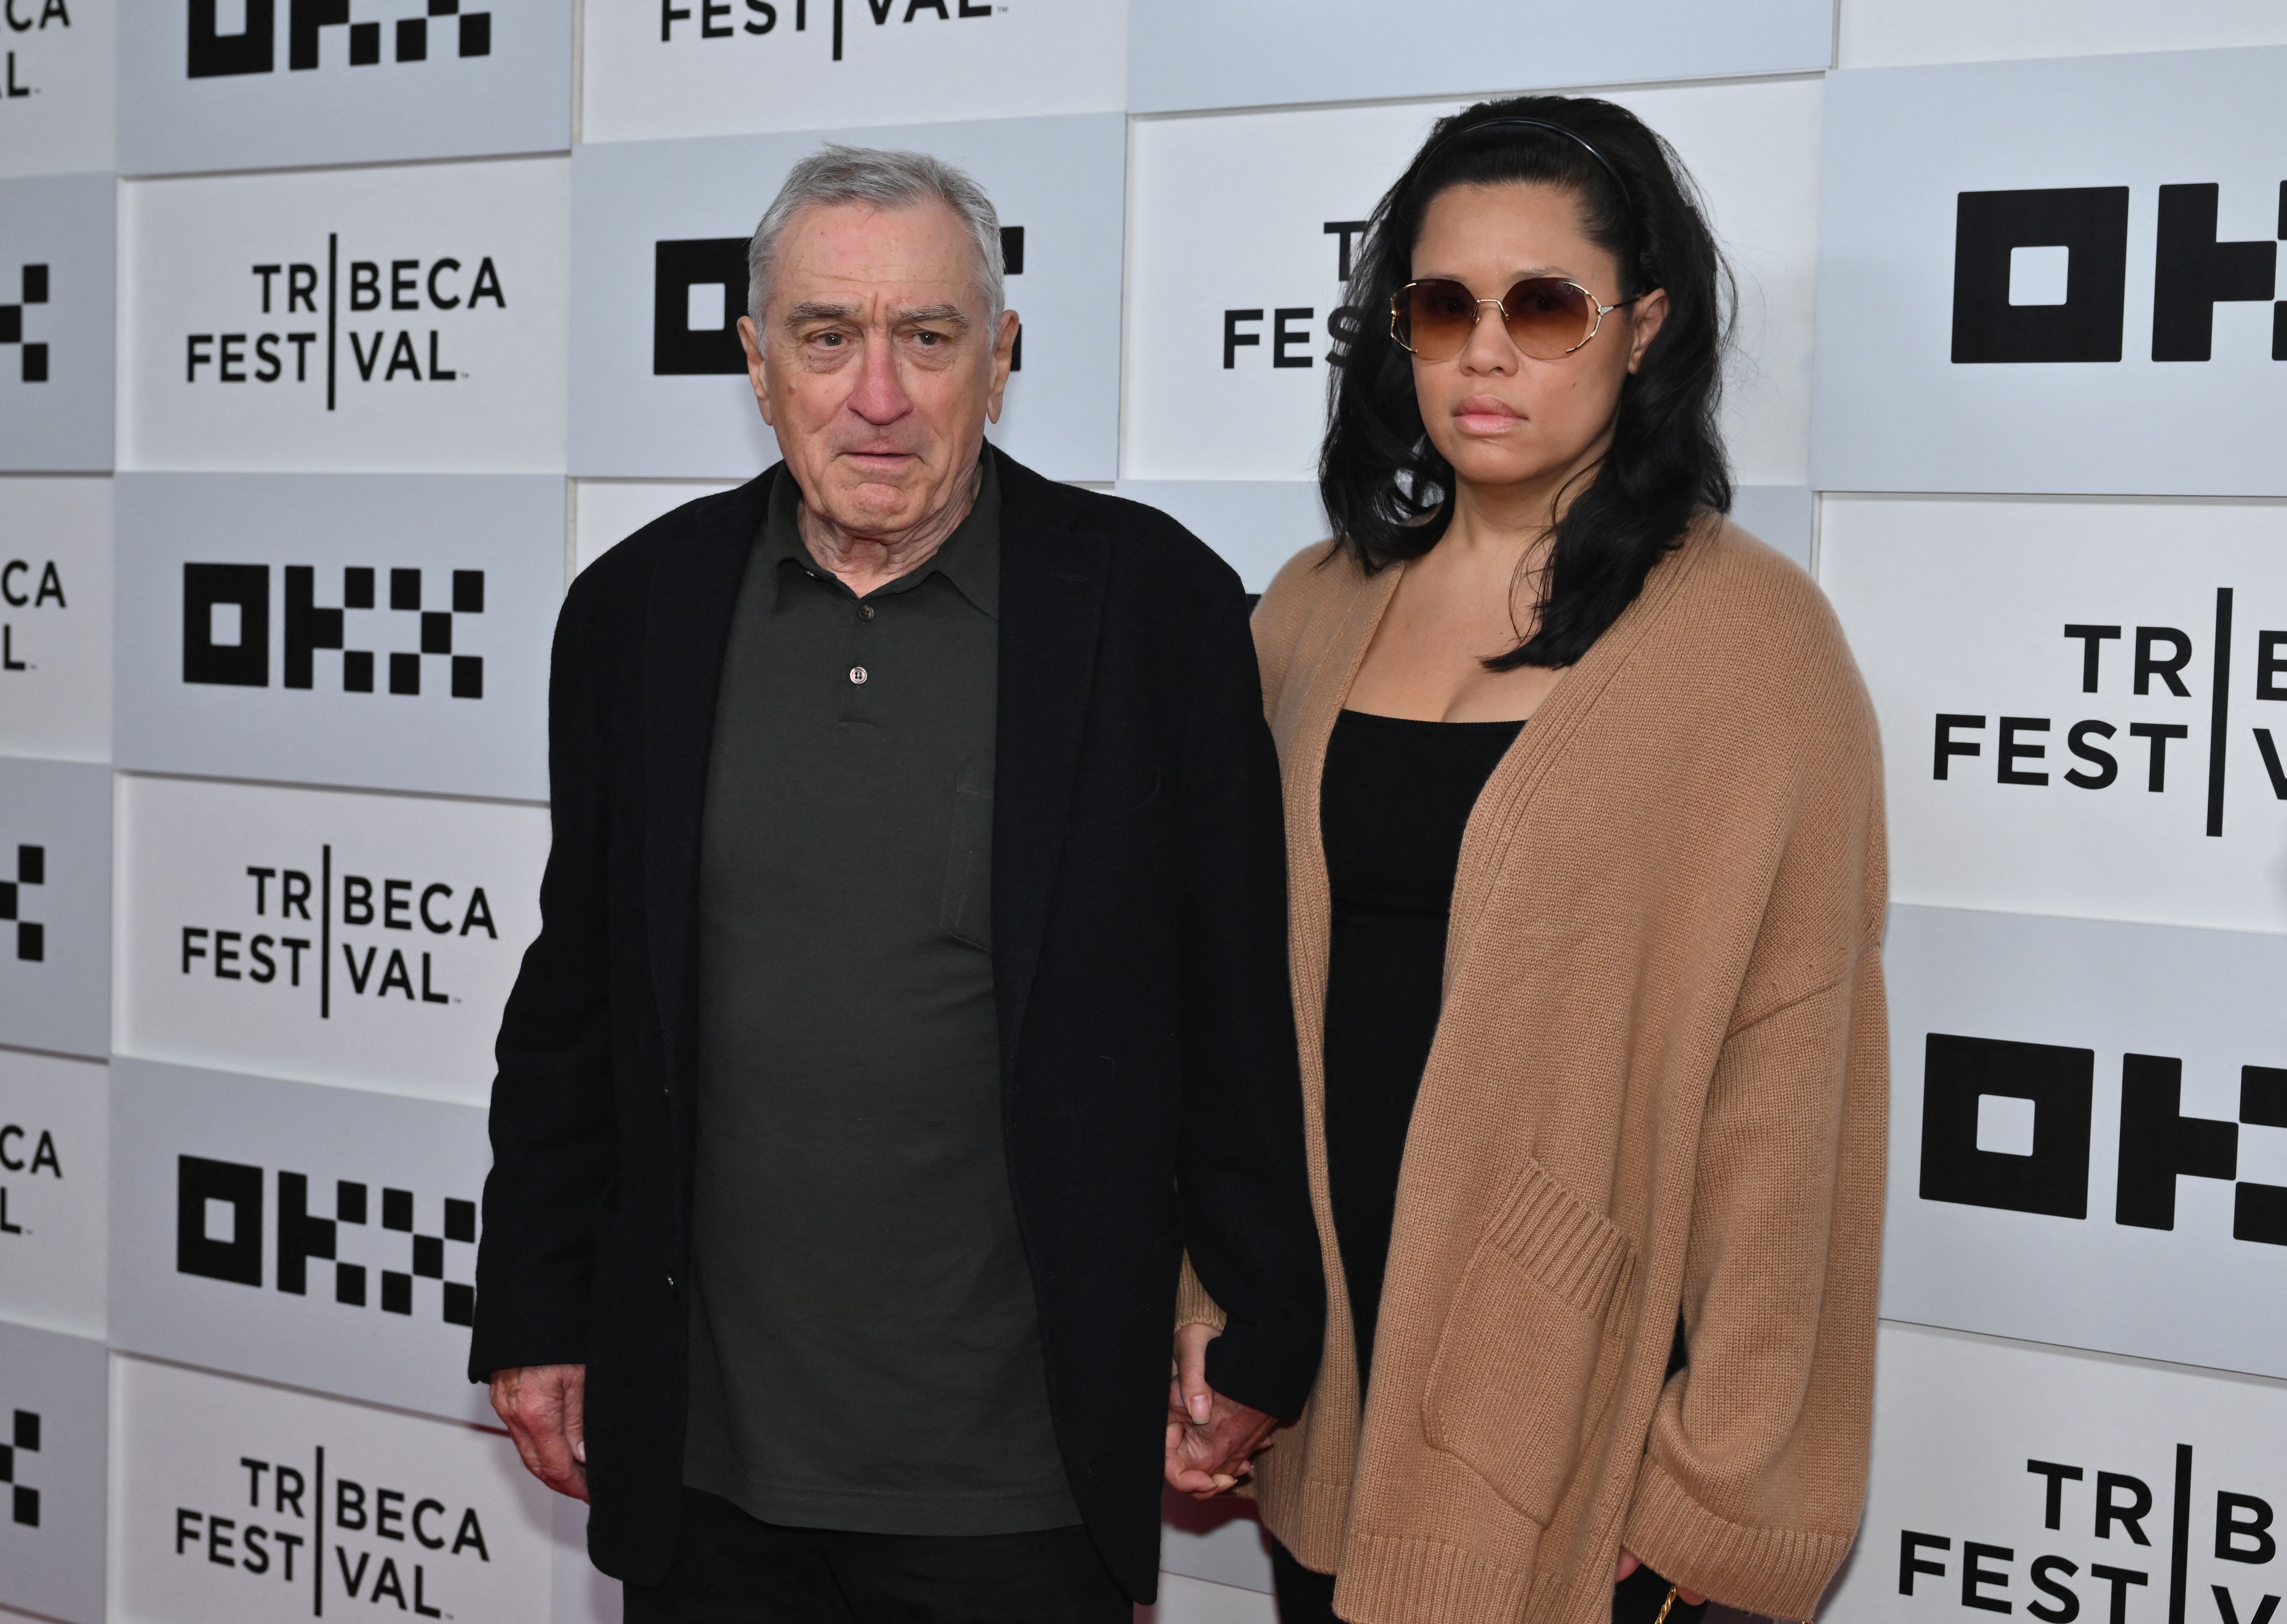 Tiffany Chen and Robert De Niro at the Tribeca Film Festival at OKX Theater in New York City on June 7, 2023. | Source: Getty Images